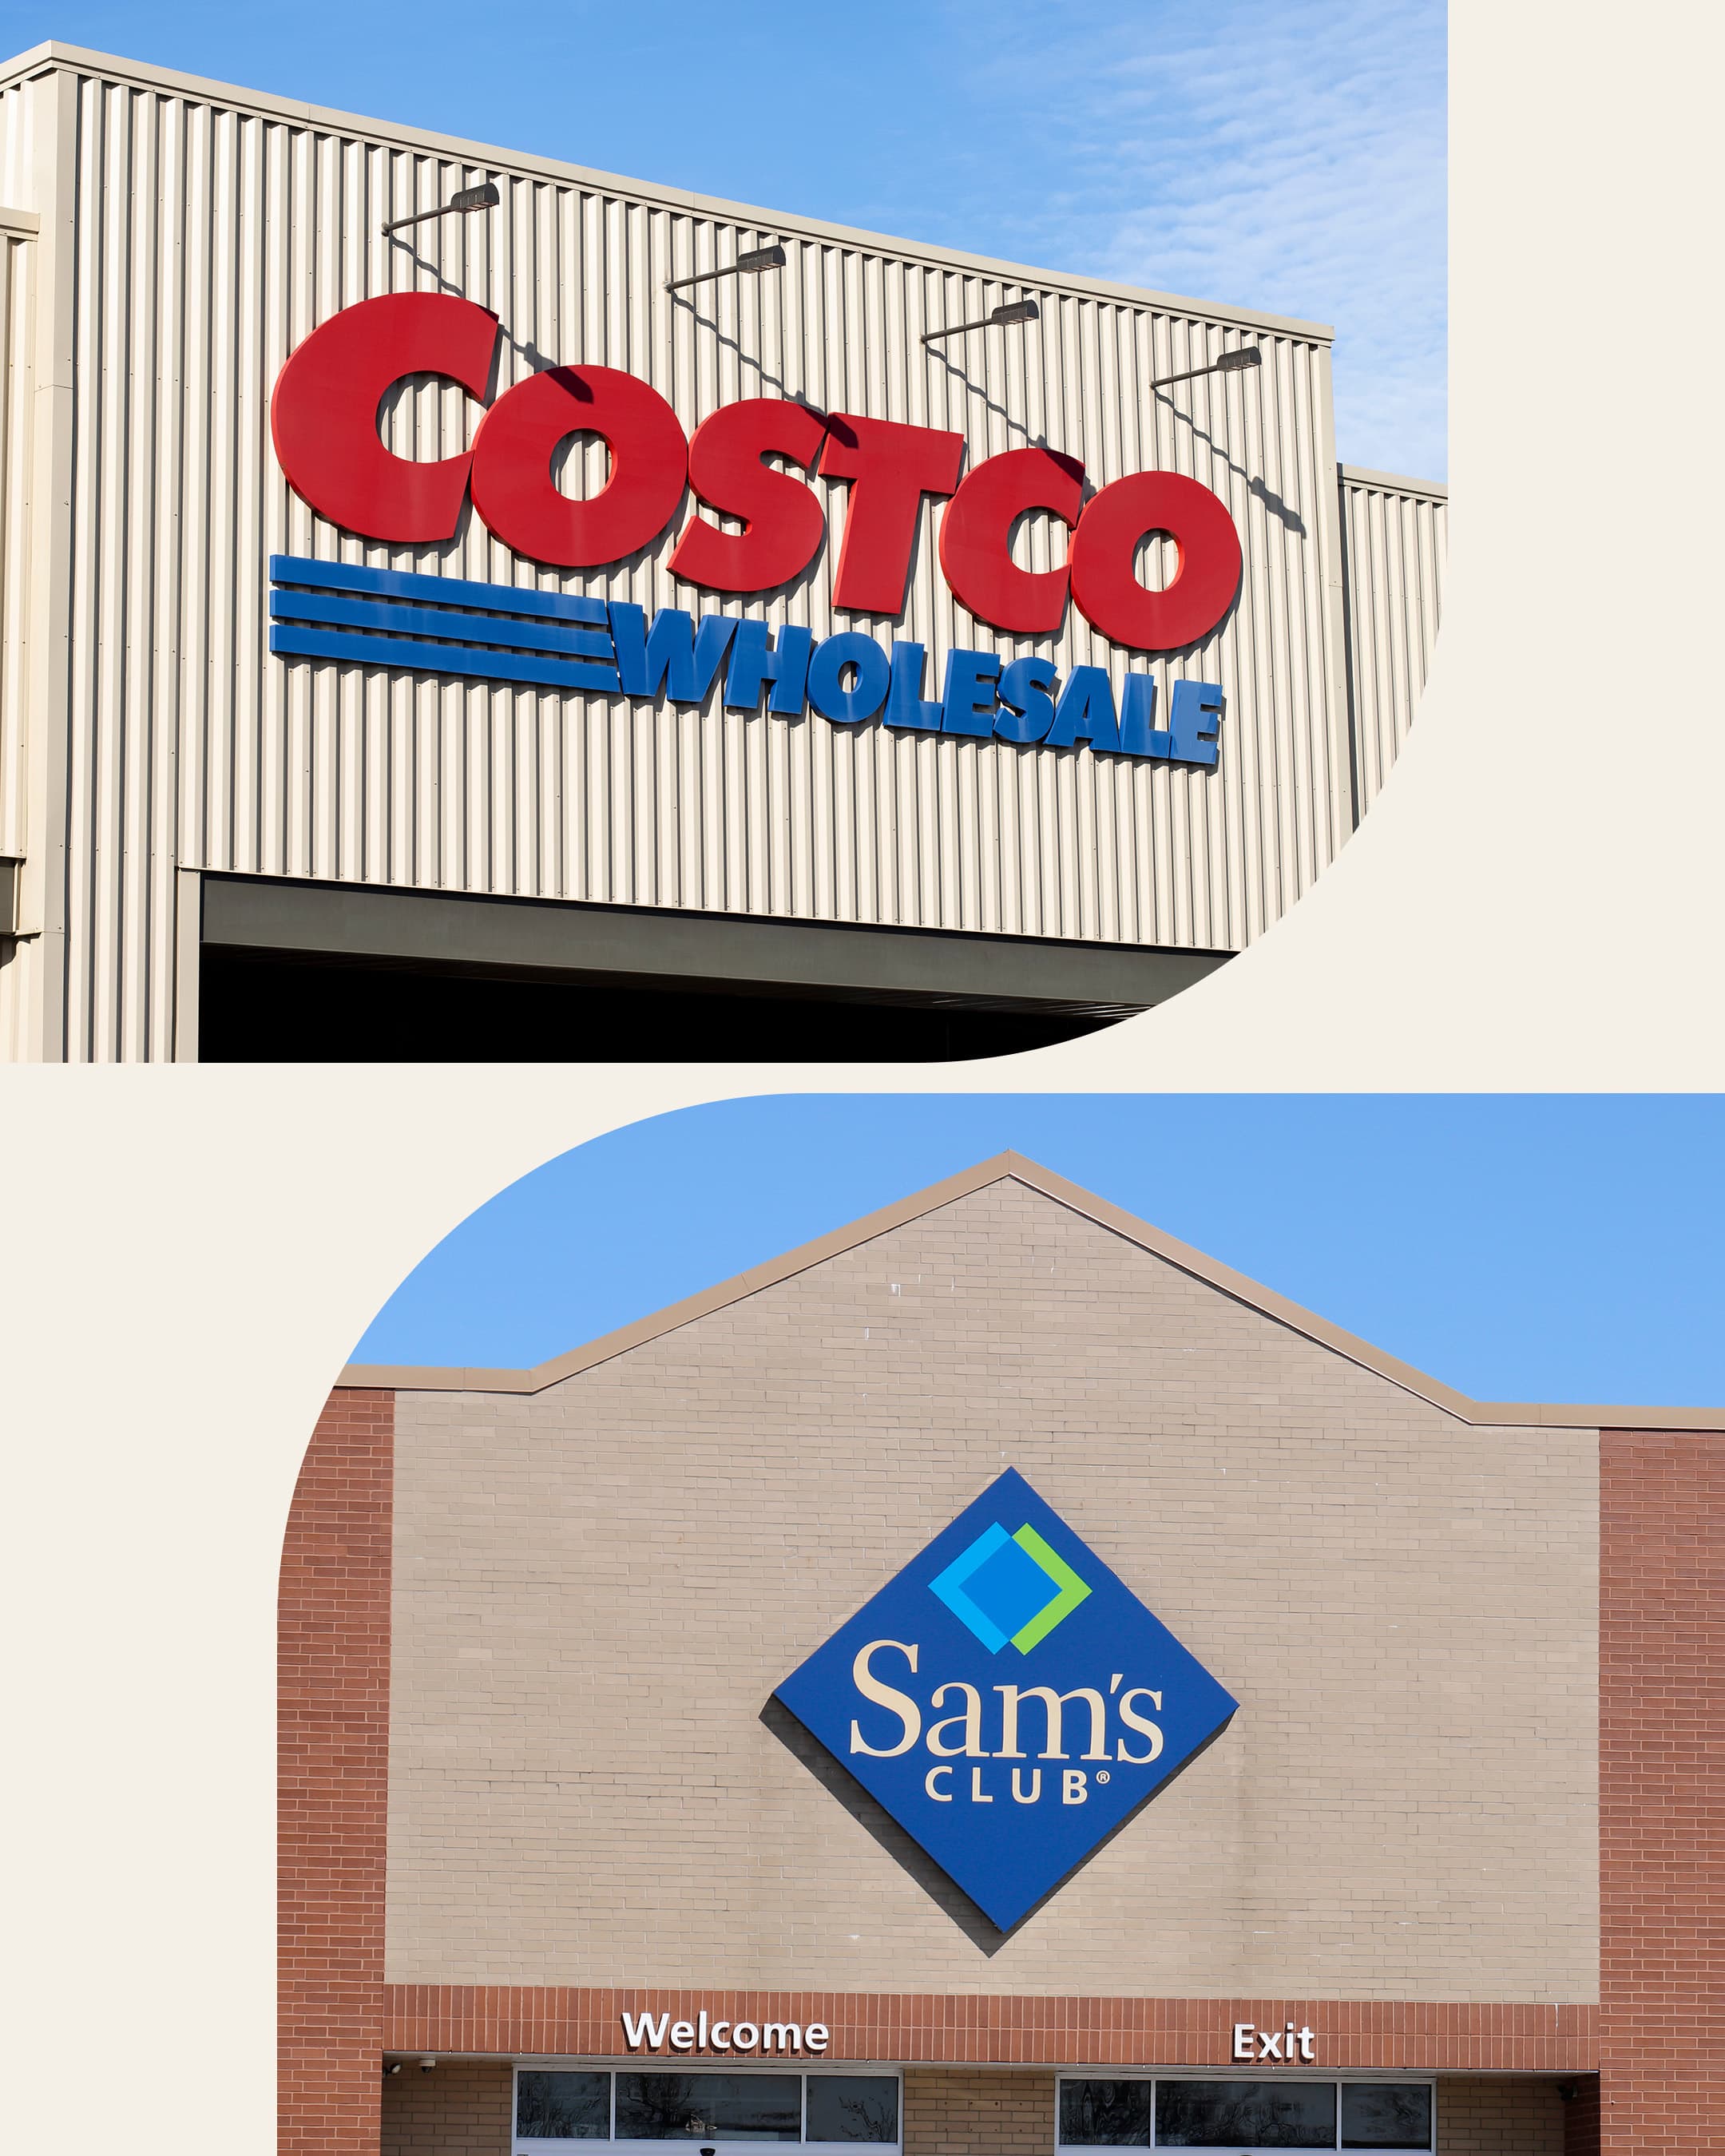 The Best Sam's Club Foods and Grocery Items to Add to Your Cart